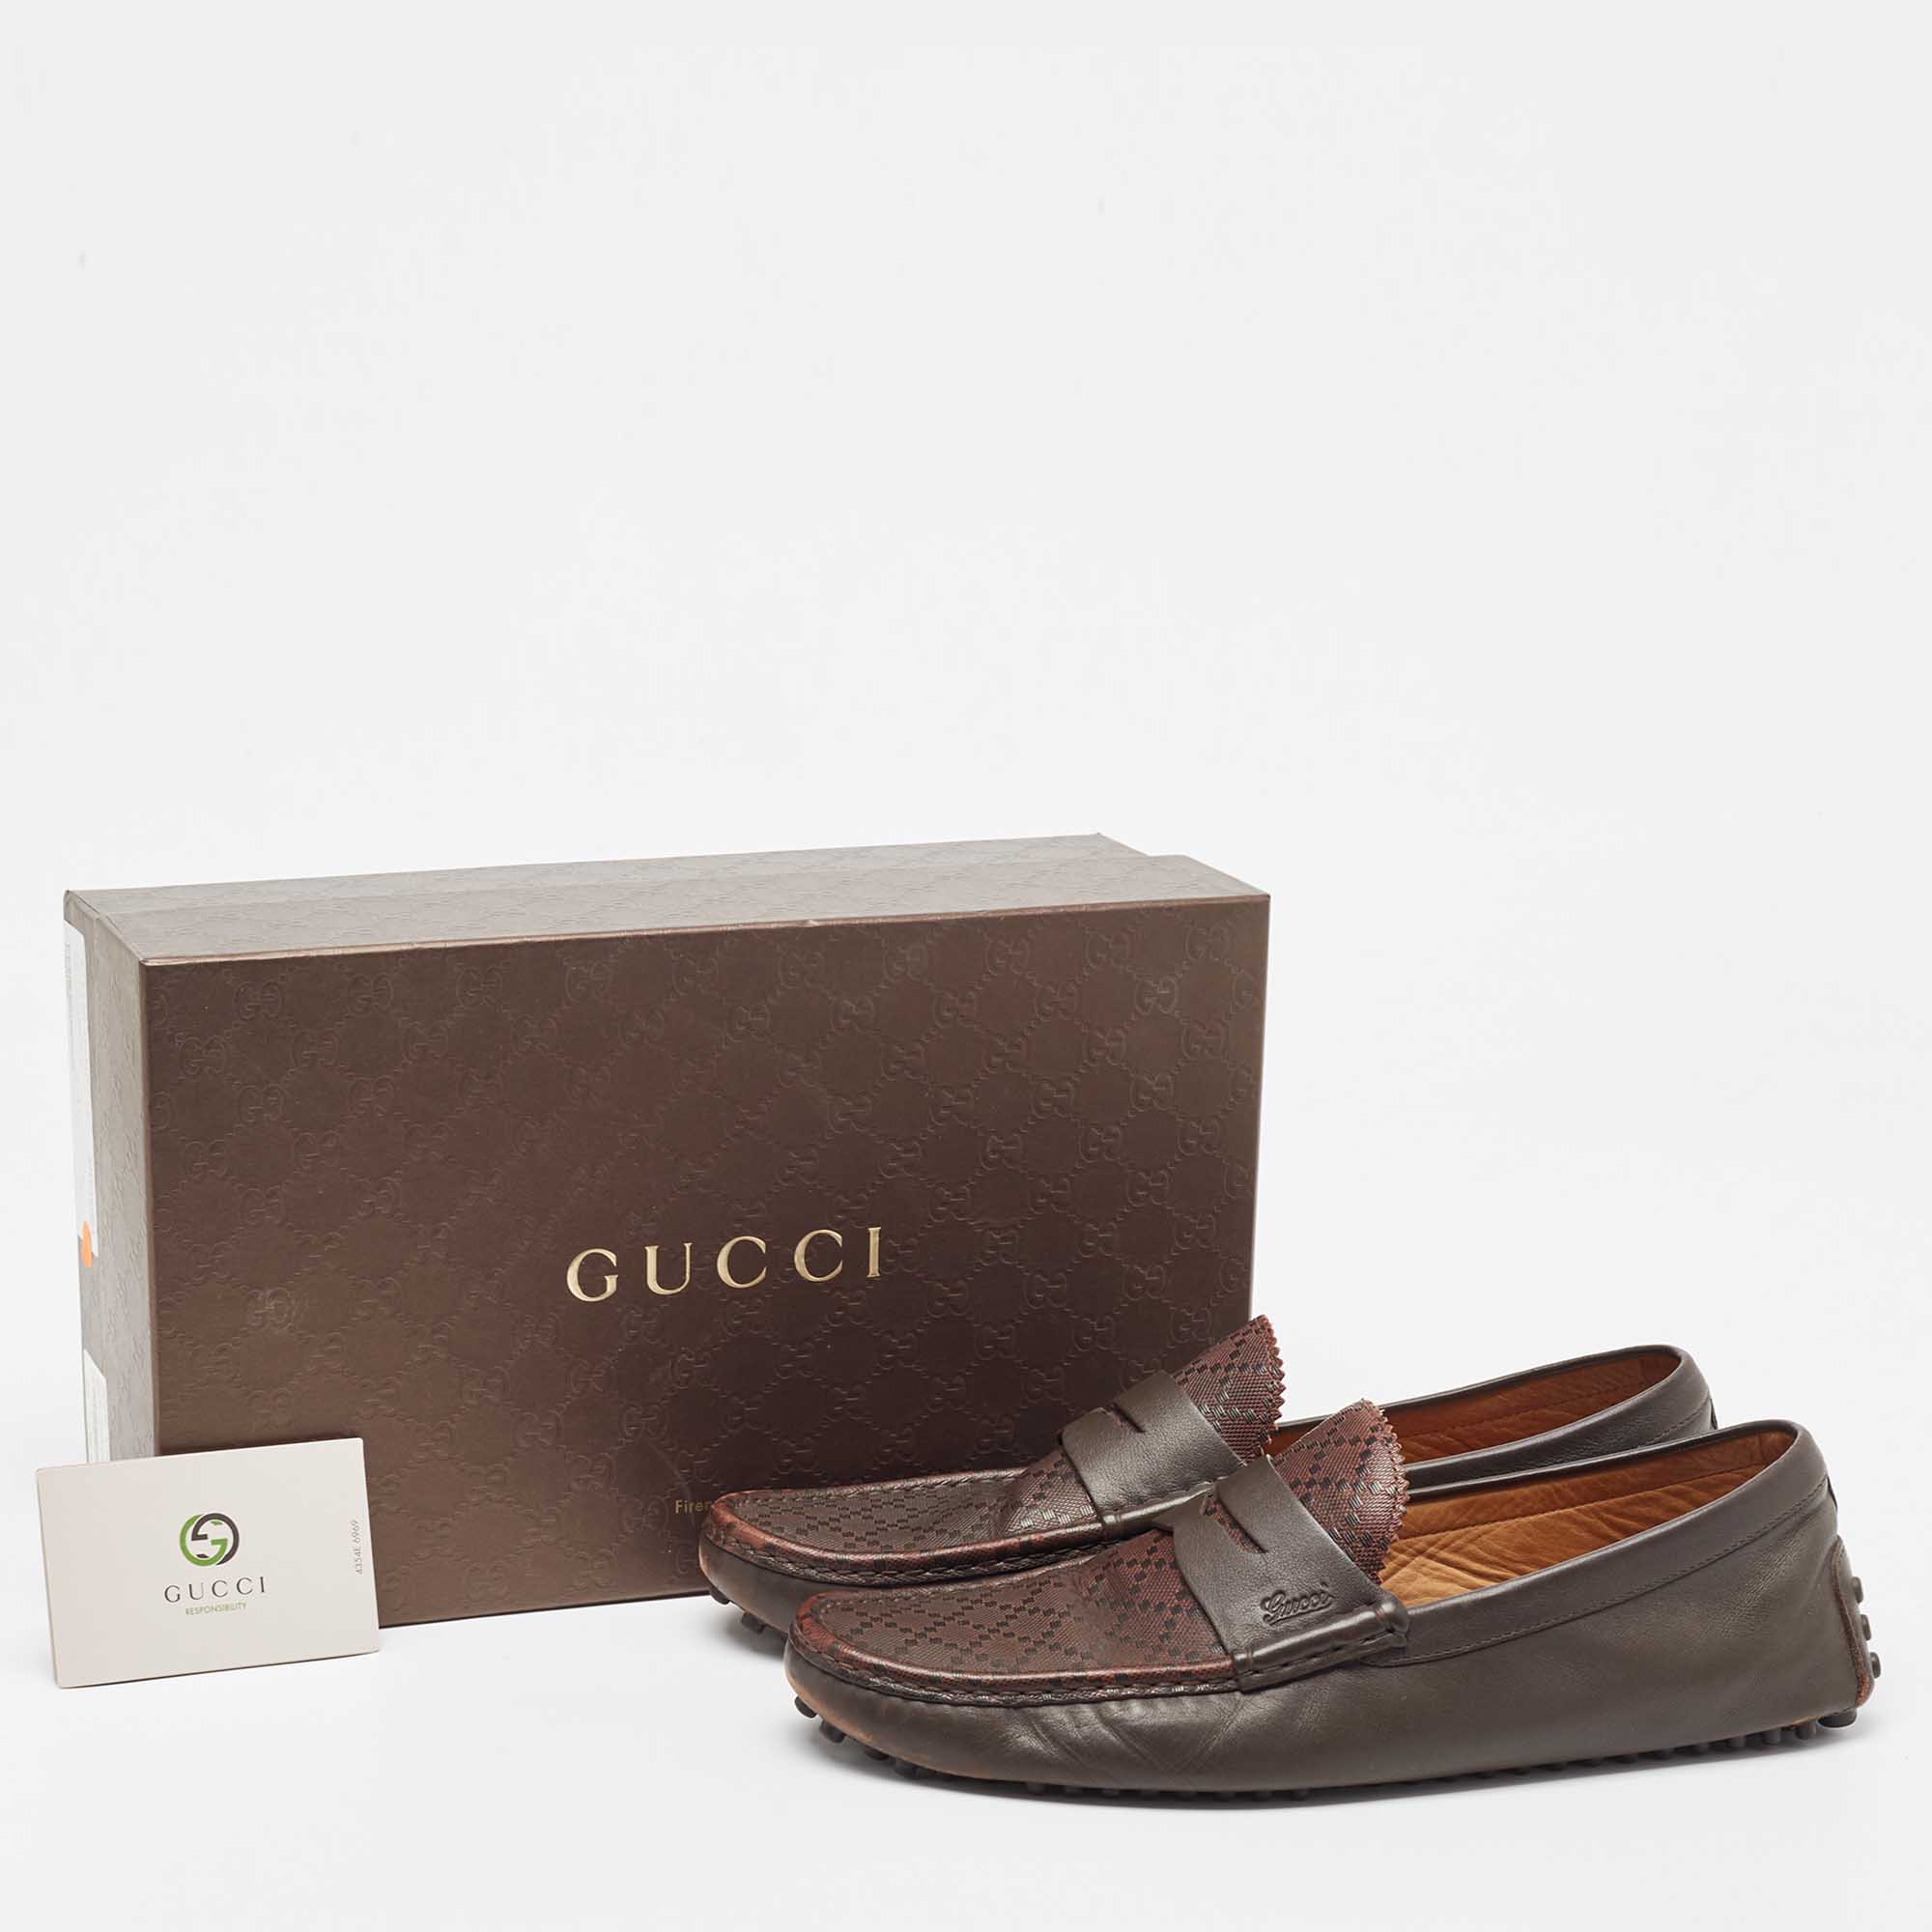 Gucci Dark Brown Diamante Leather Penny Slip On Loafers Size 45.5